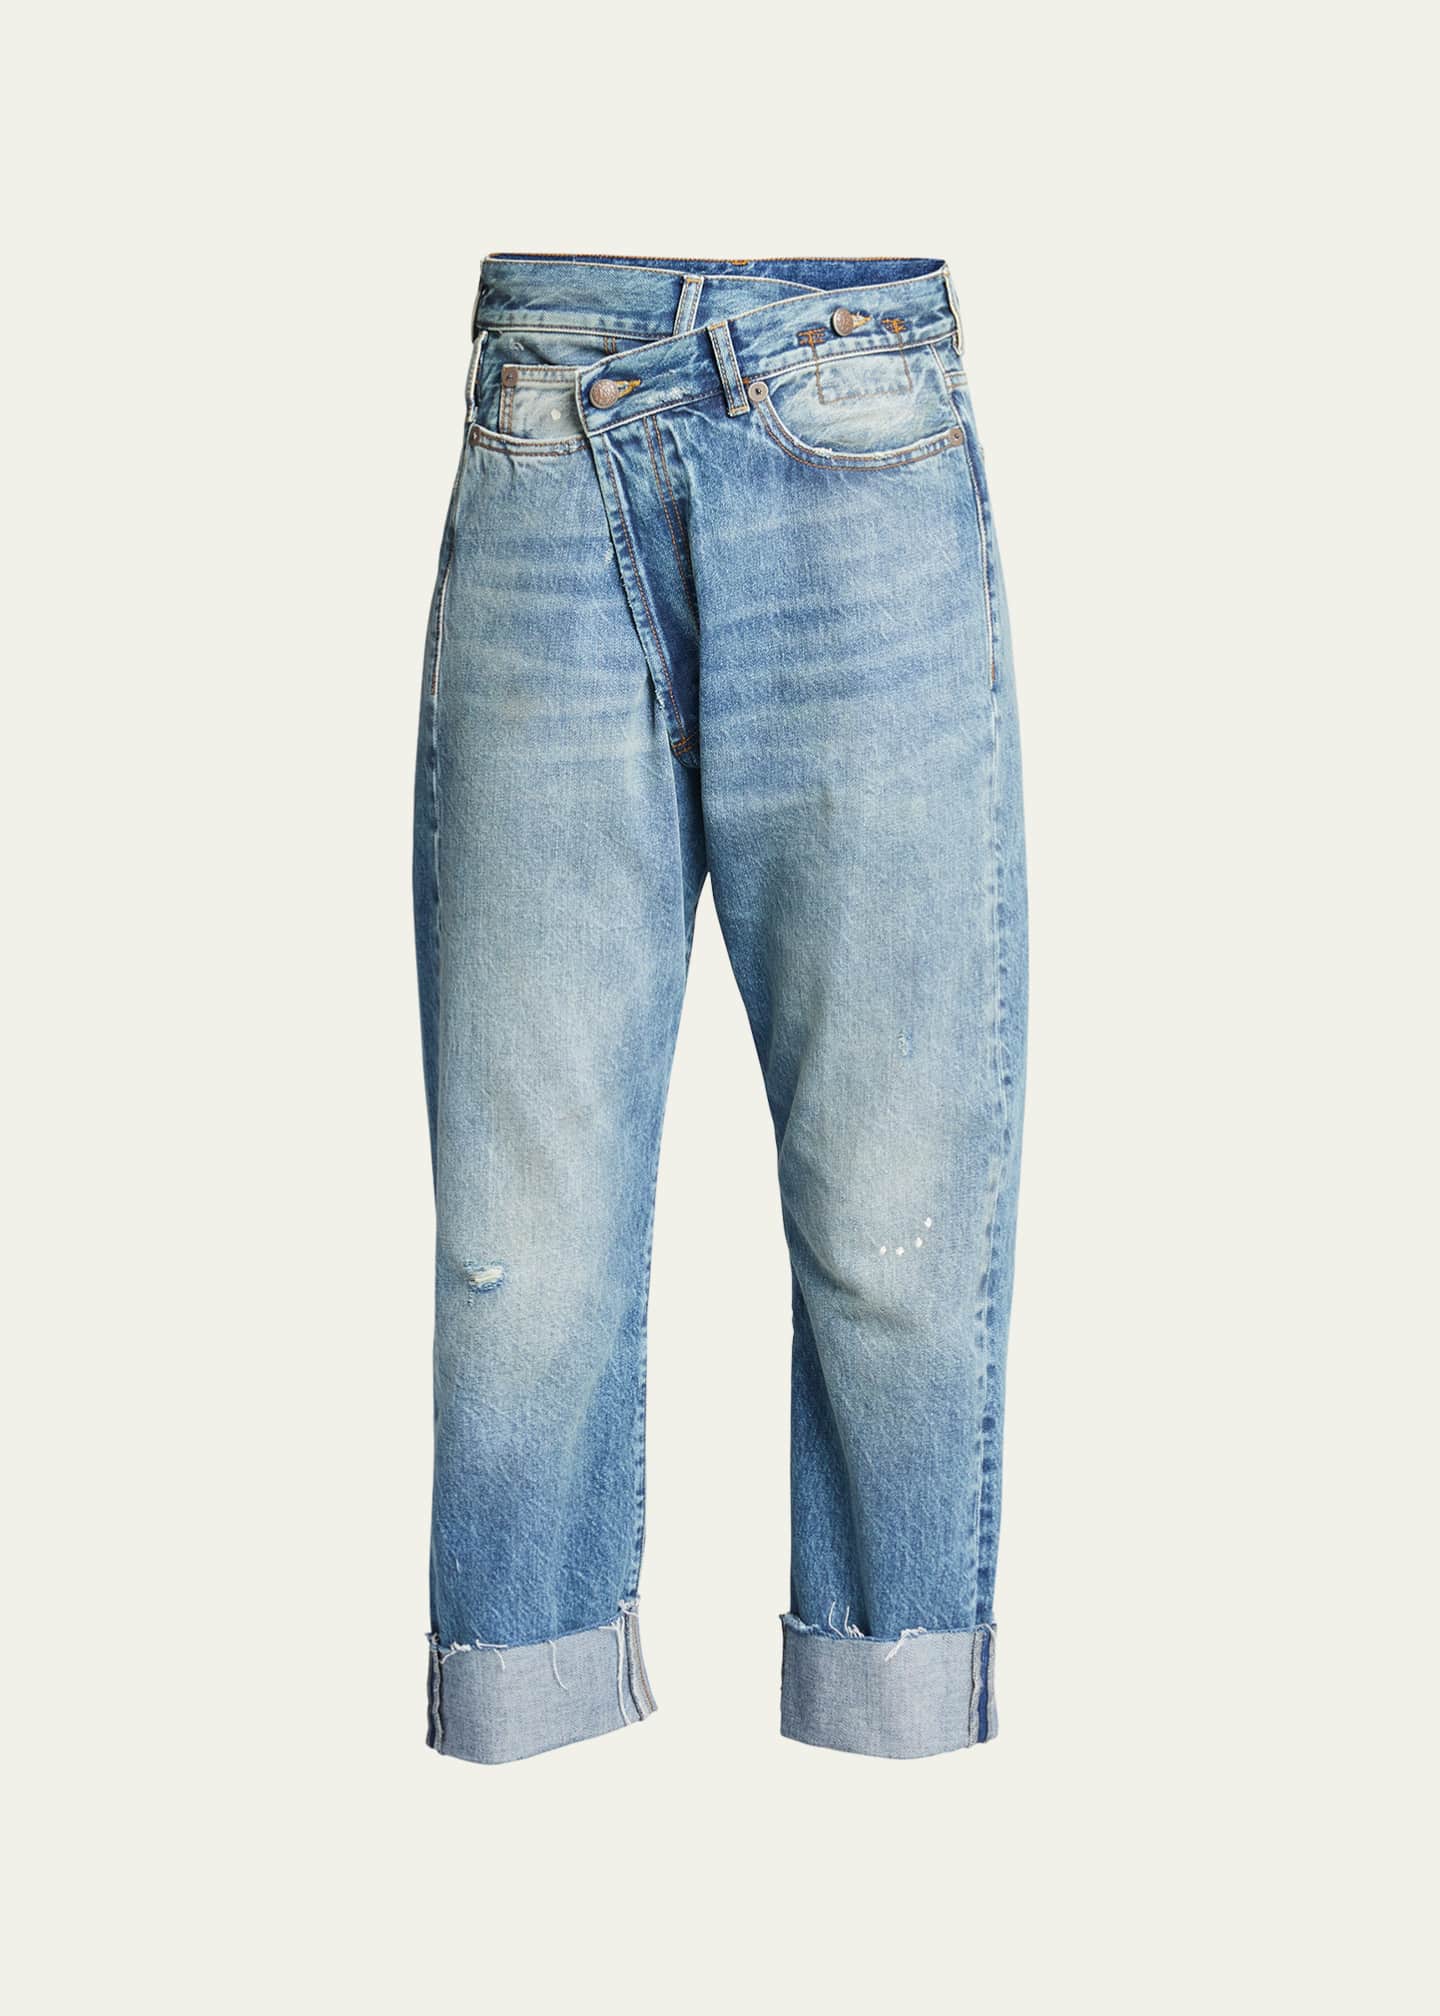 R13 Crossover Cuffed Jeans Image 1 of 5